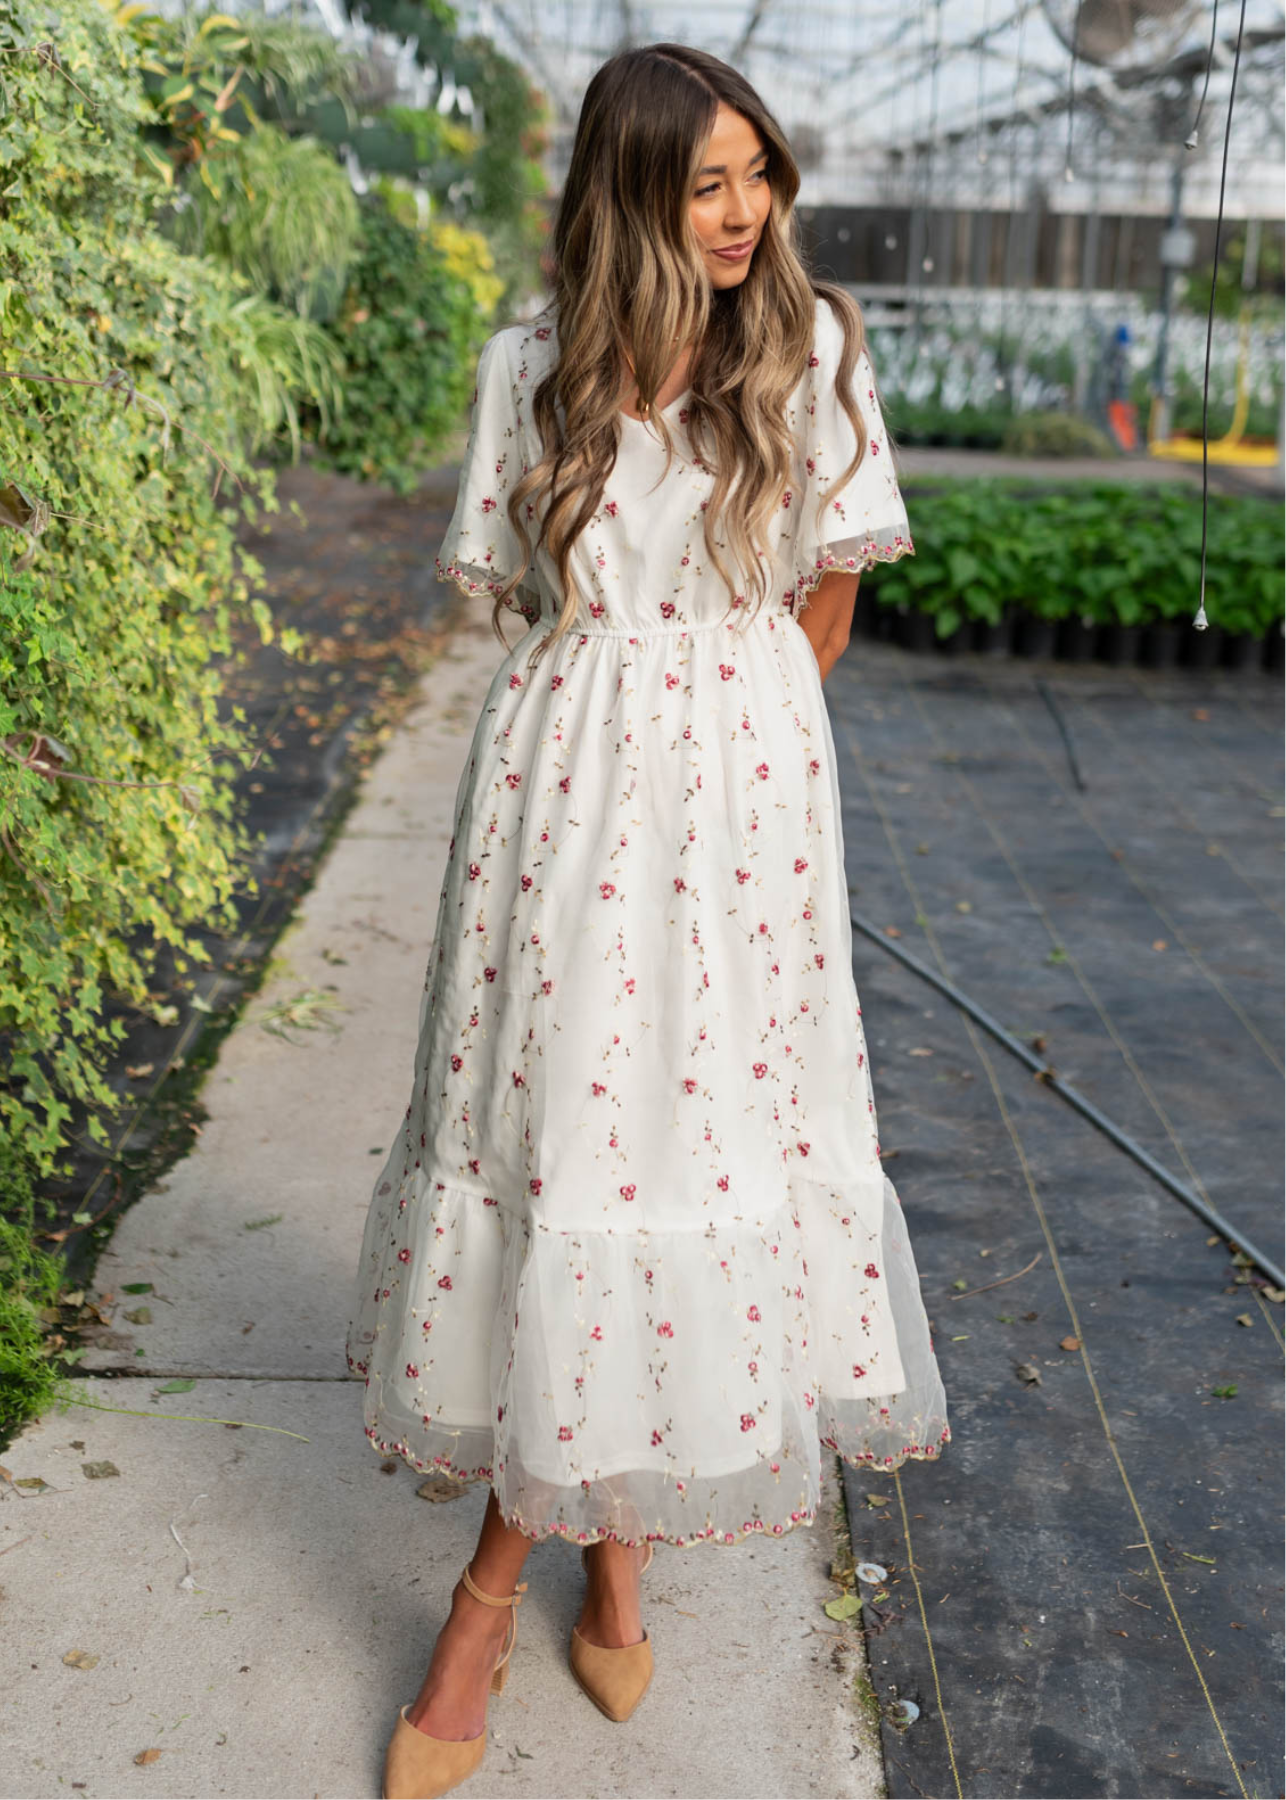 Short sleeve ivory embroidered floral dress